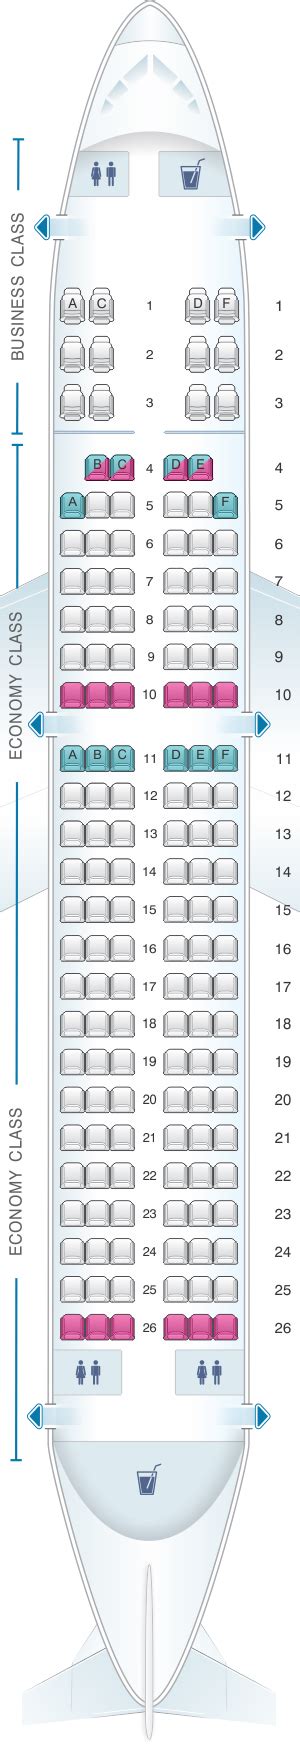 Airbus A320 Air India Seat Map